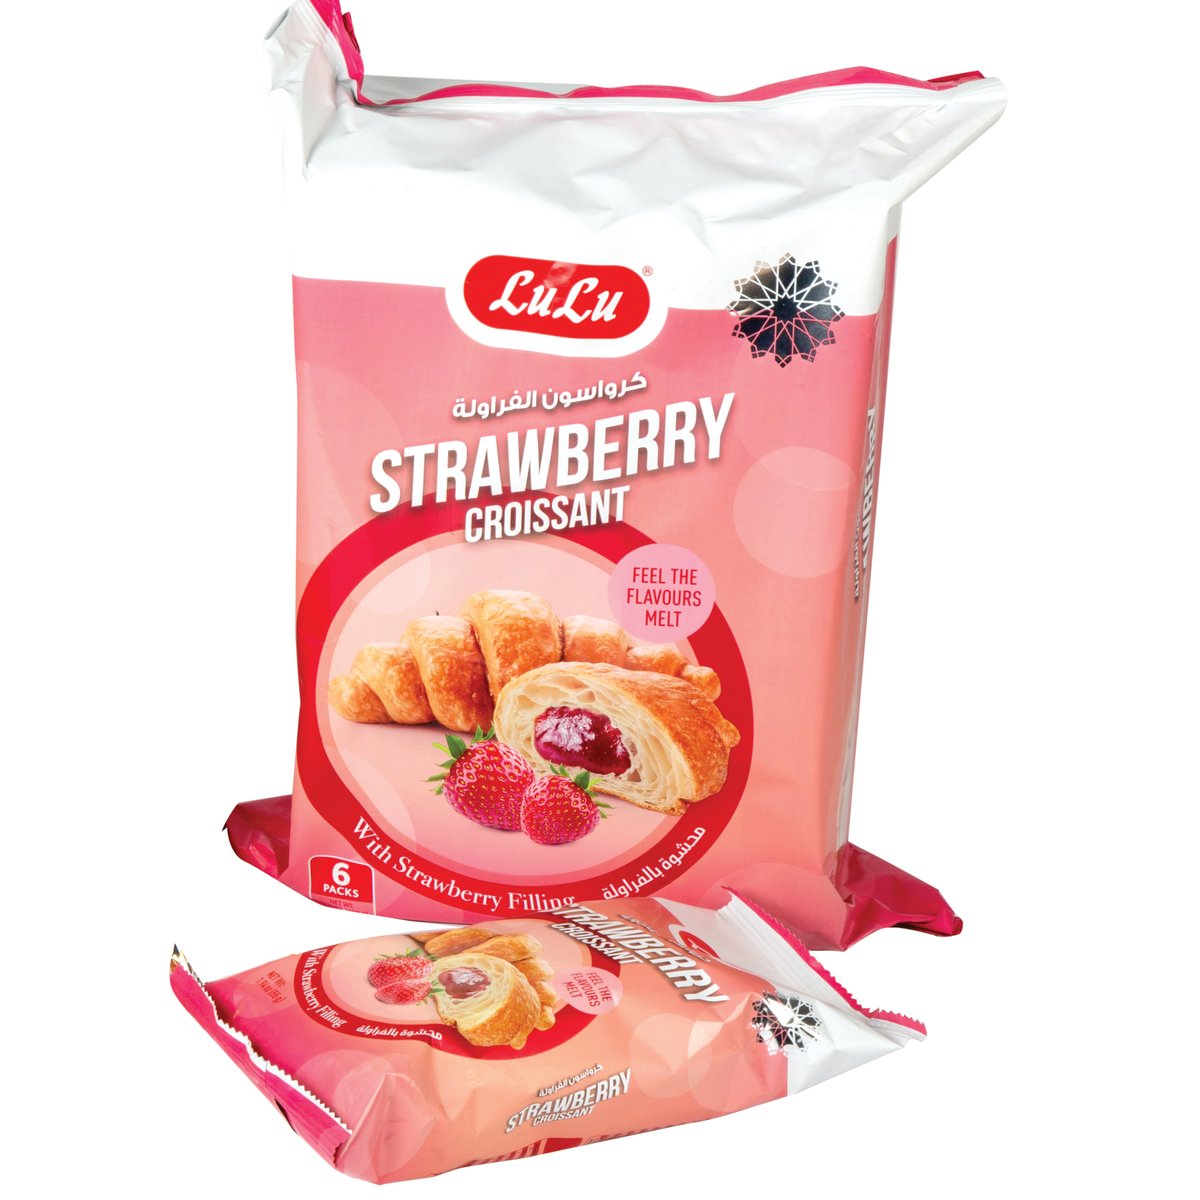 Lulu Croissant With Strawberry Filling 6 x 55g